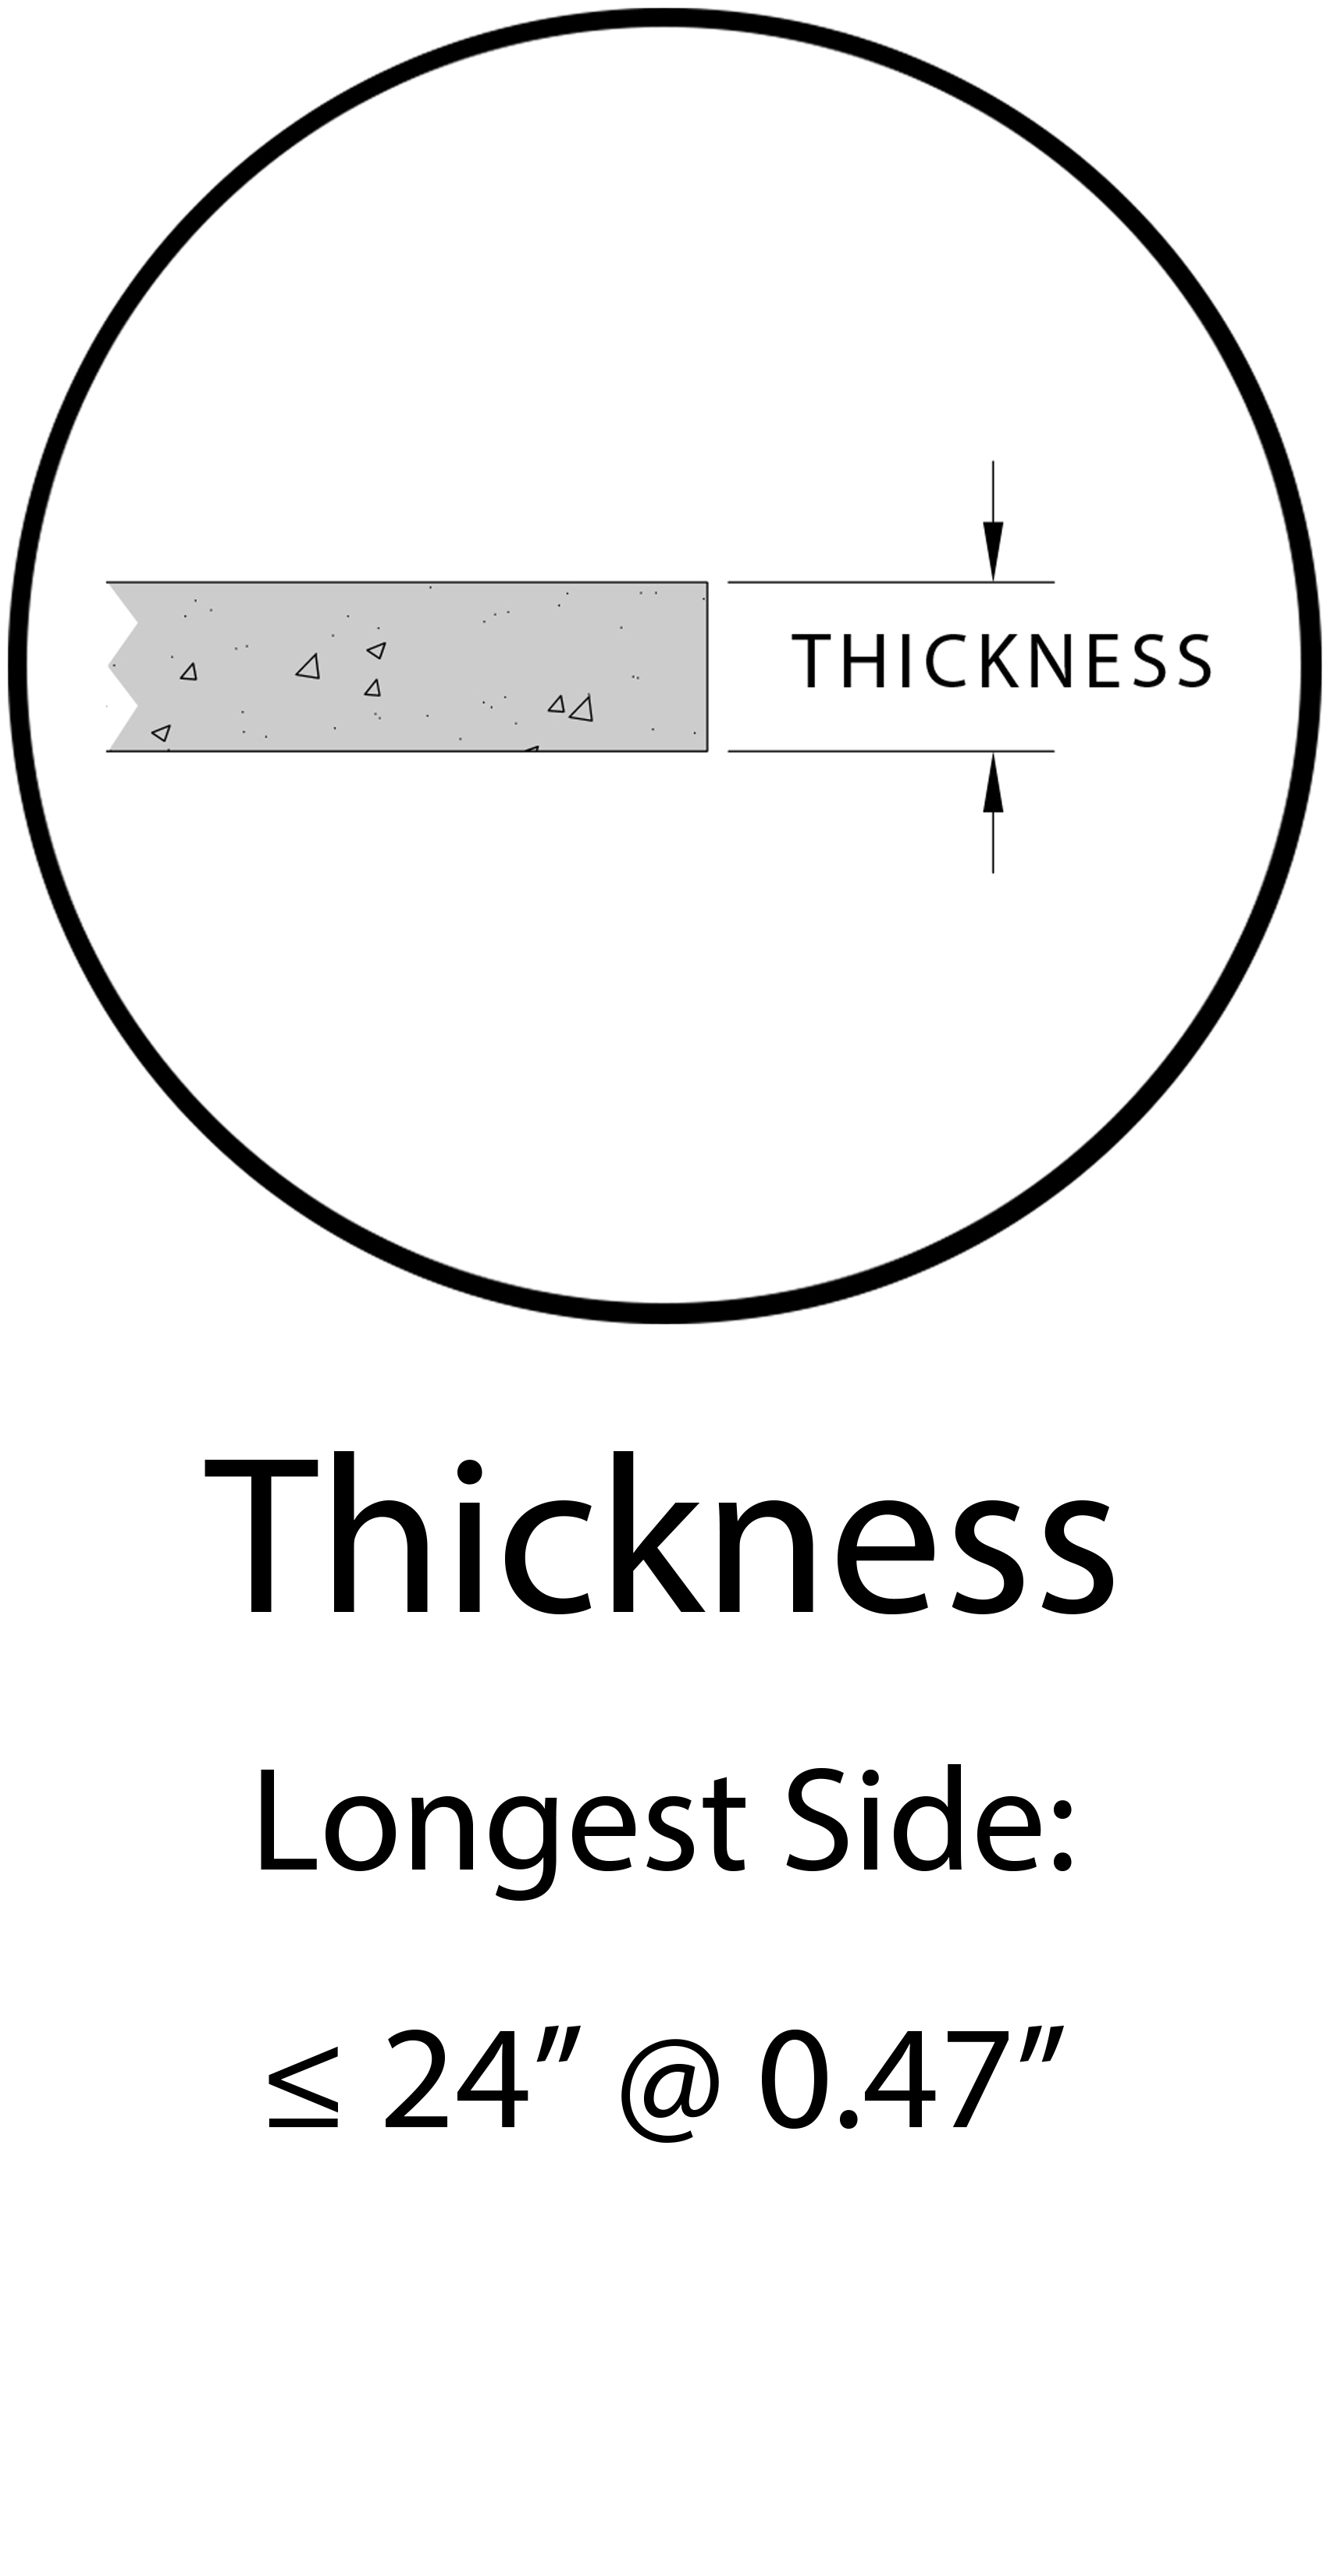 Solids_thickness.jpg